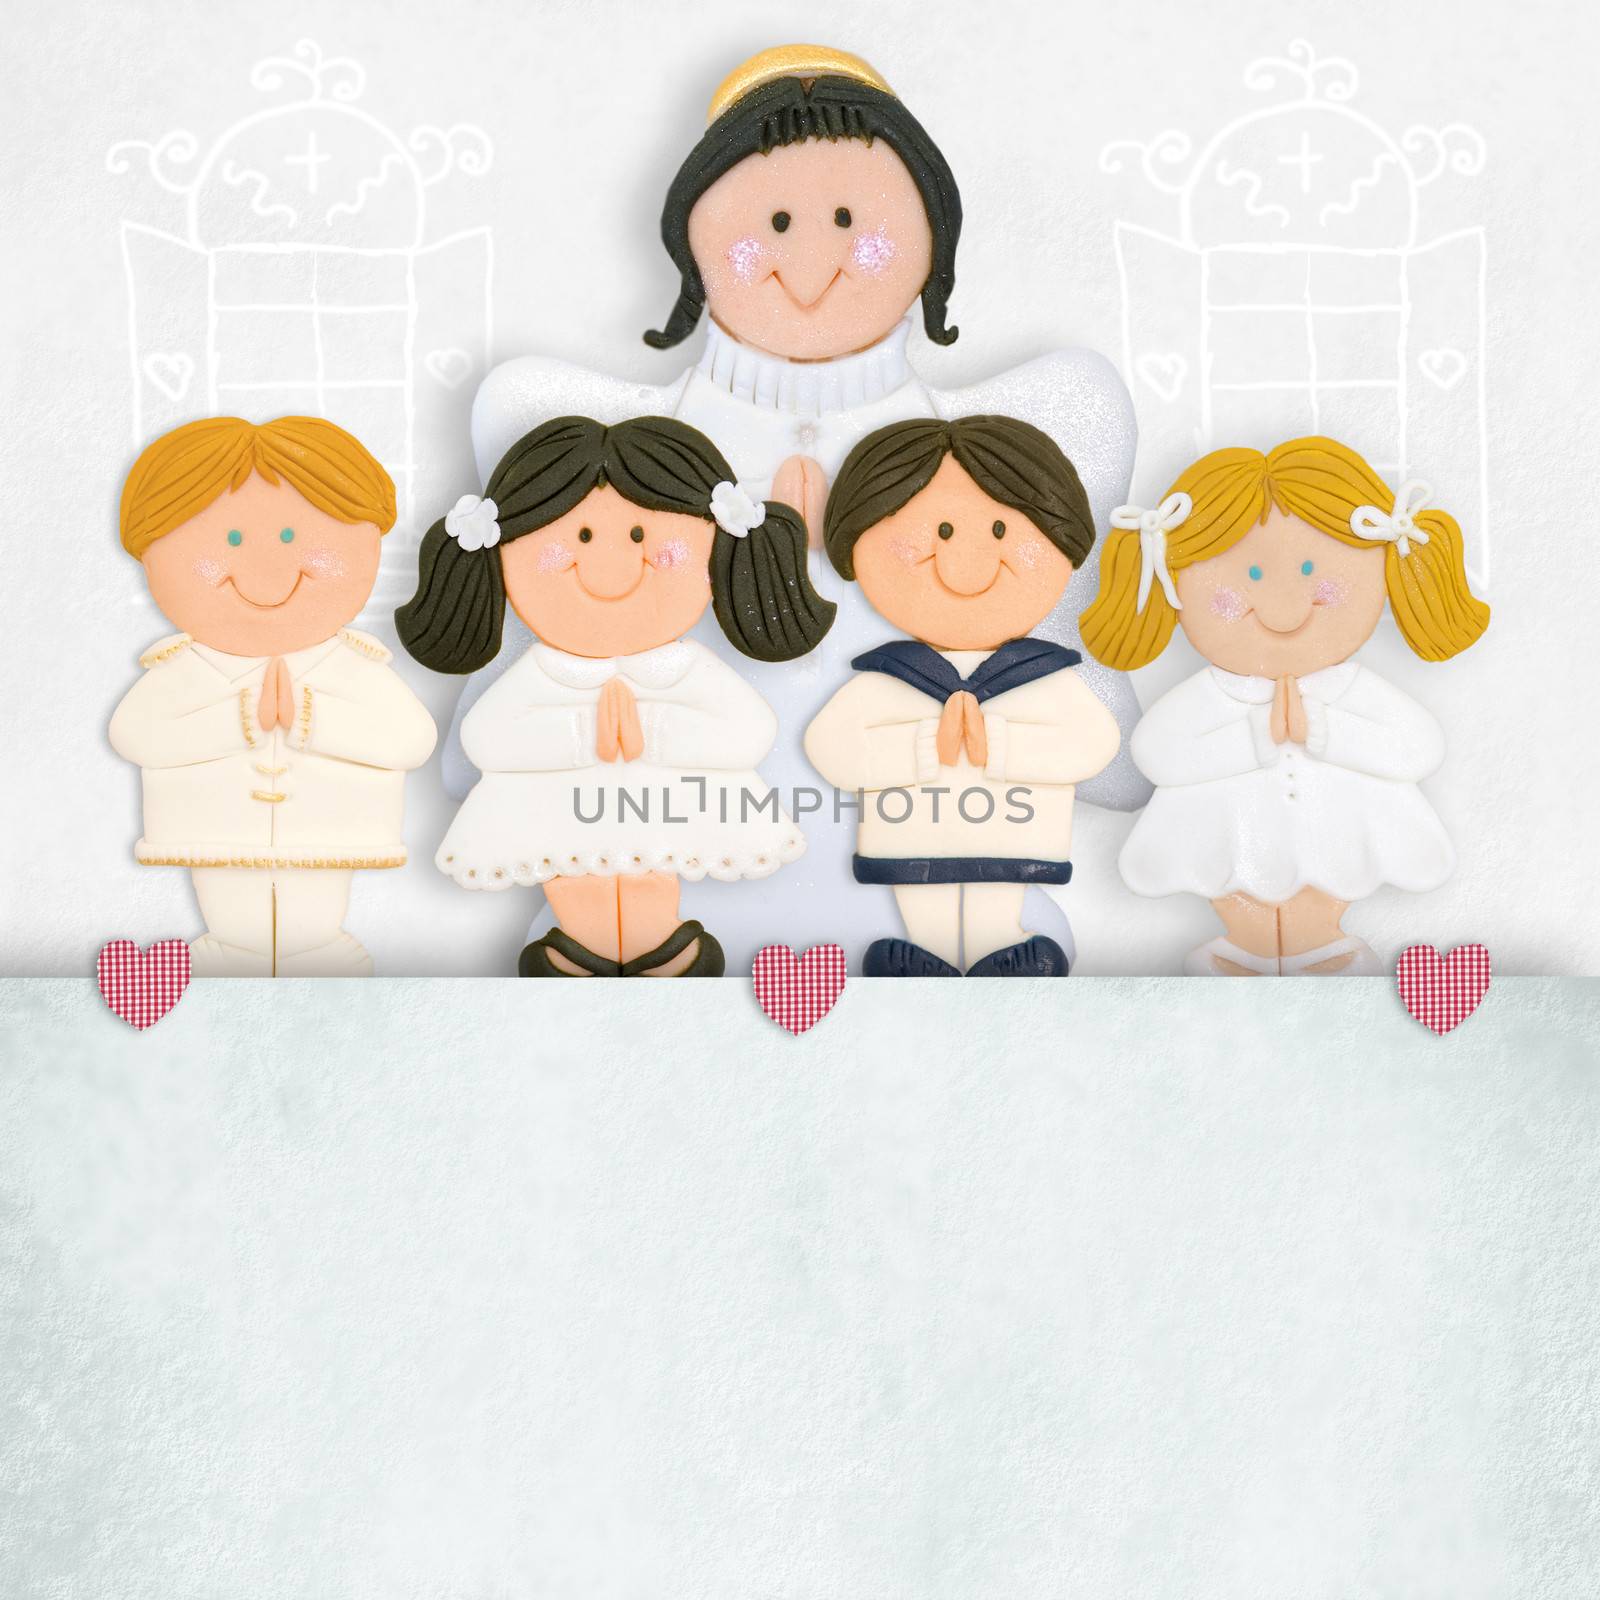 first communion invitation angel and children by Carche